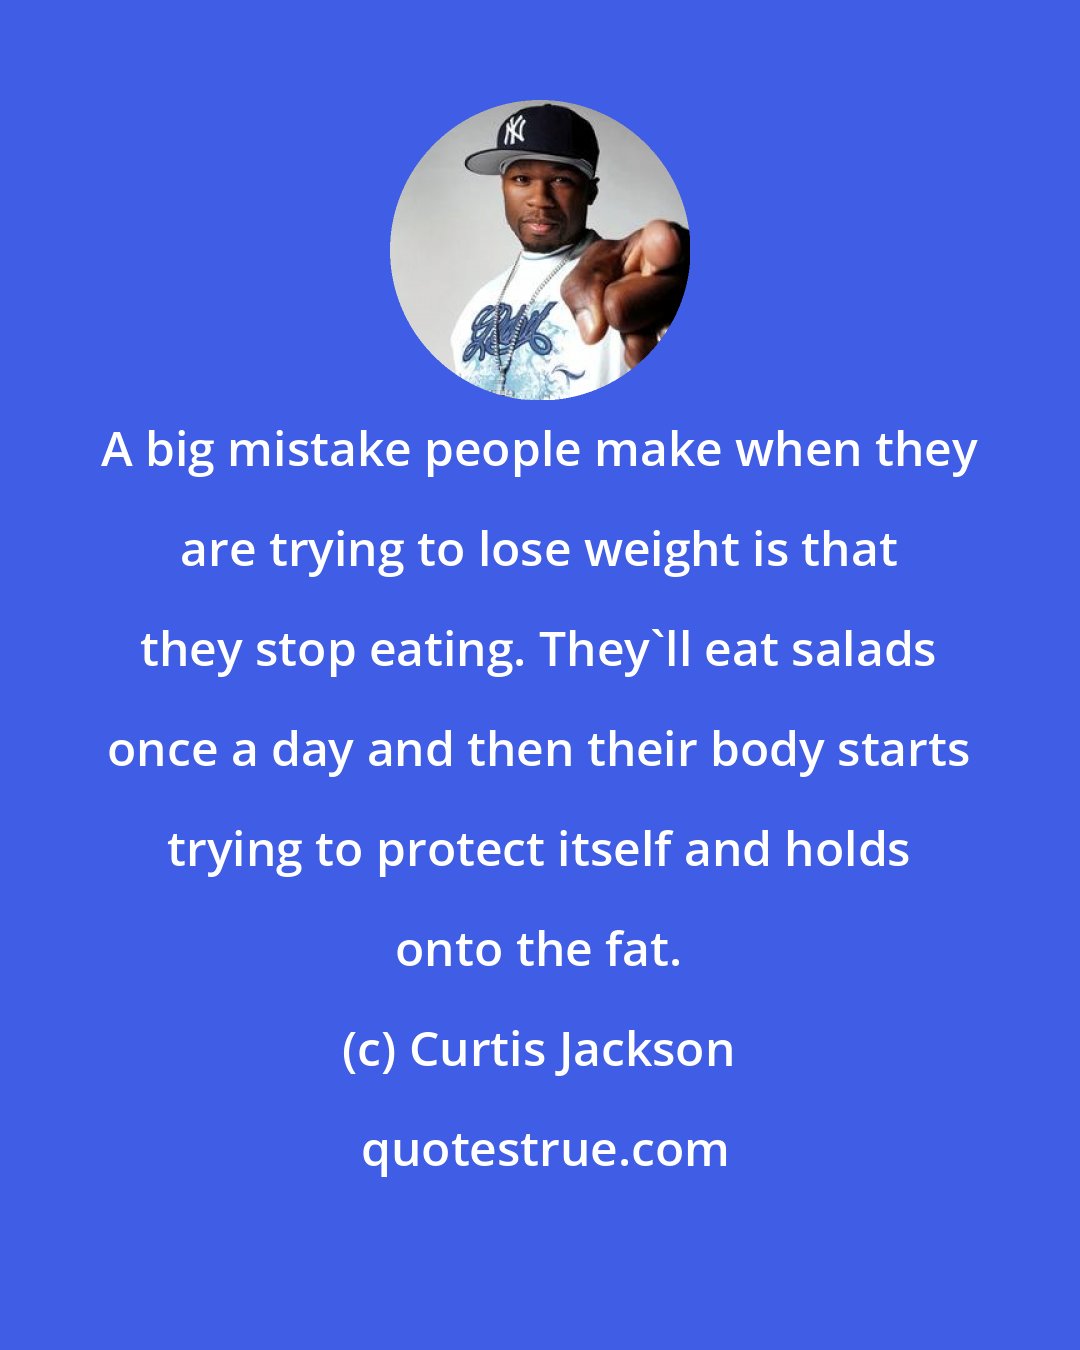 Curtis Jackson: A big mistake people make when they are trying to lose weight is that they stop eating. They'll eat salads once a day and then their body starts trying to protect itself and holds onto the fat.